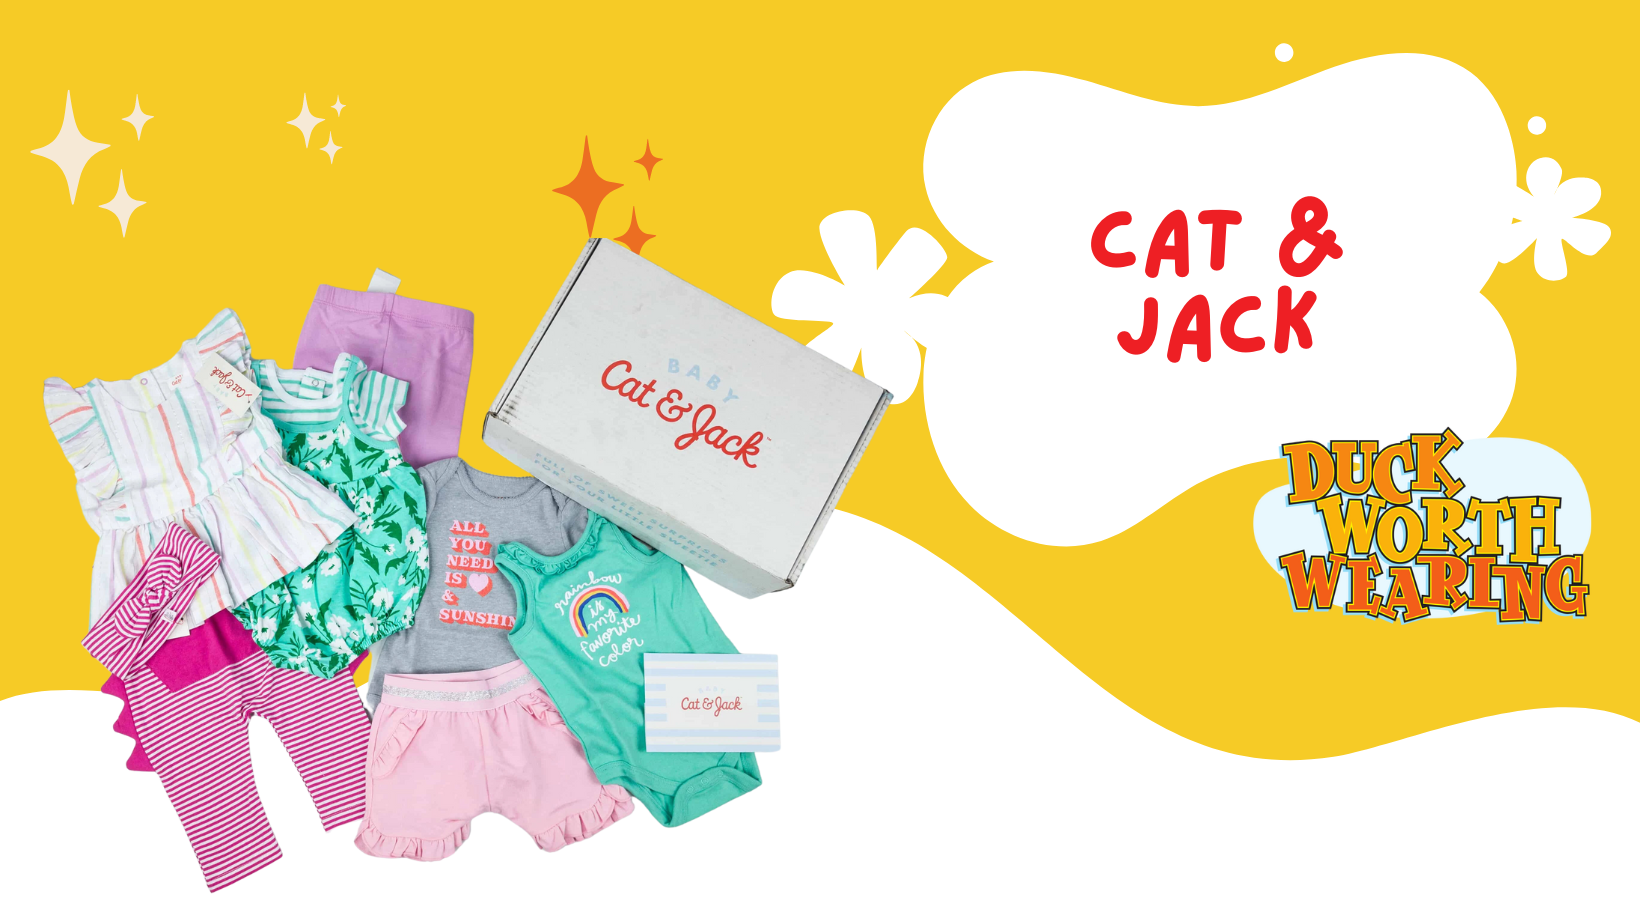 FAMILY-FAVOURITE BRAND CAT & JACK® EXCLUSIVELY LAUNCHES AT